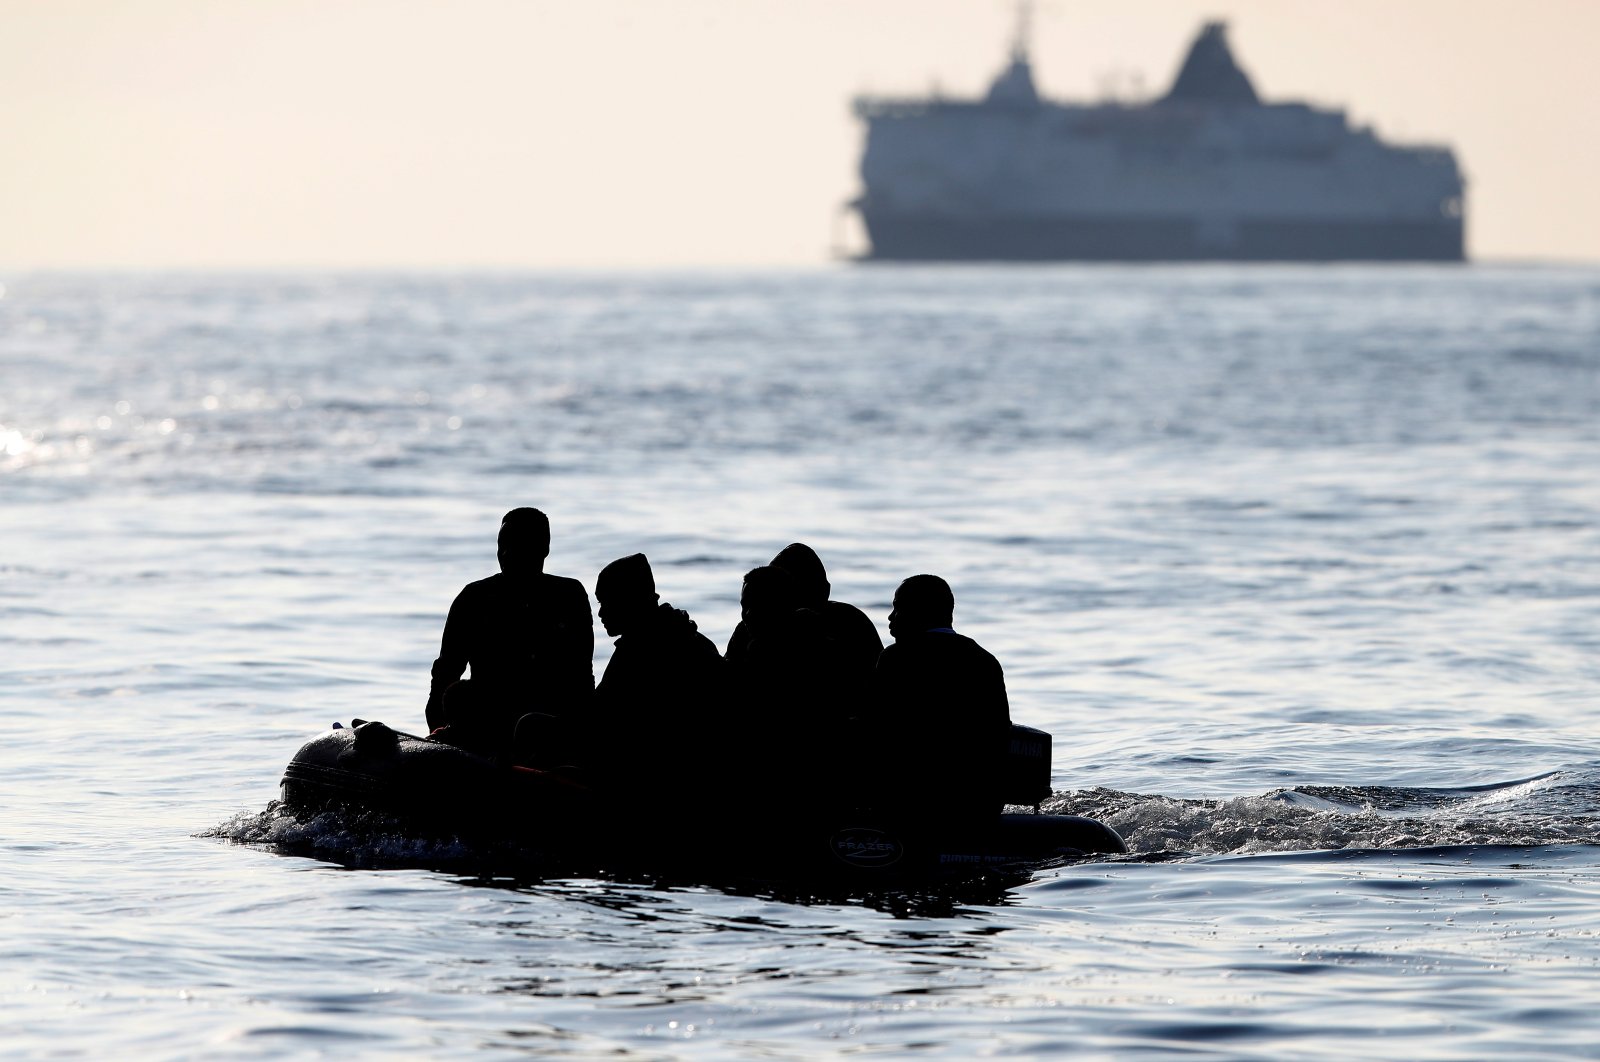 People who say they are from Darfur, Sudan cross the English Channel in an inflatable boat near Dover, Britain, Aug. 4, 2021. (Reuters Photo)